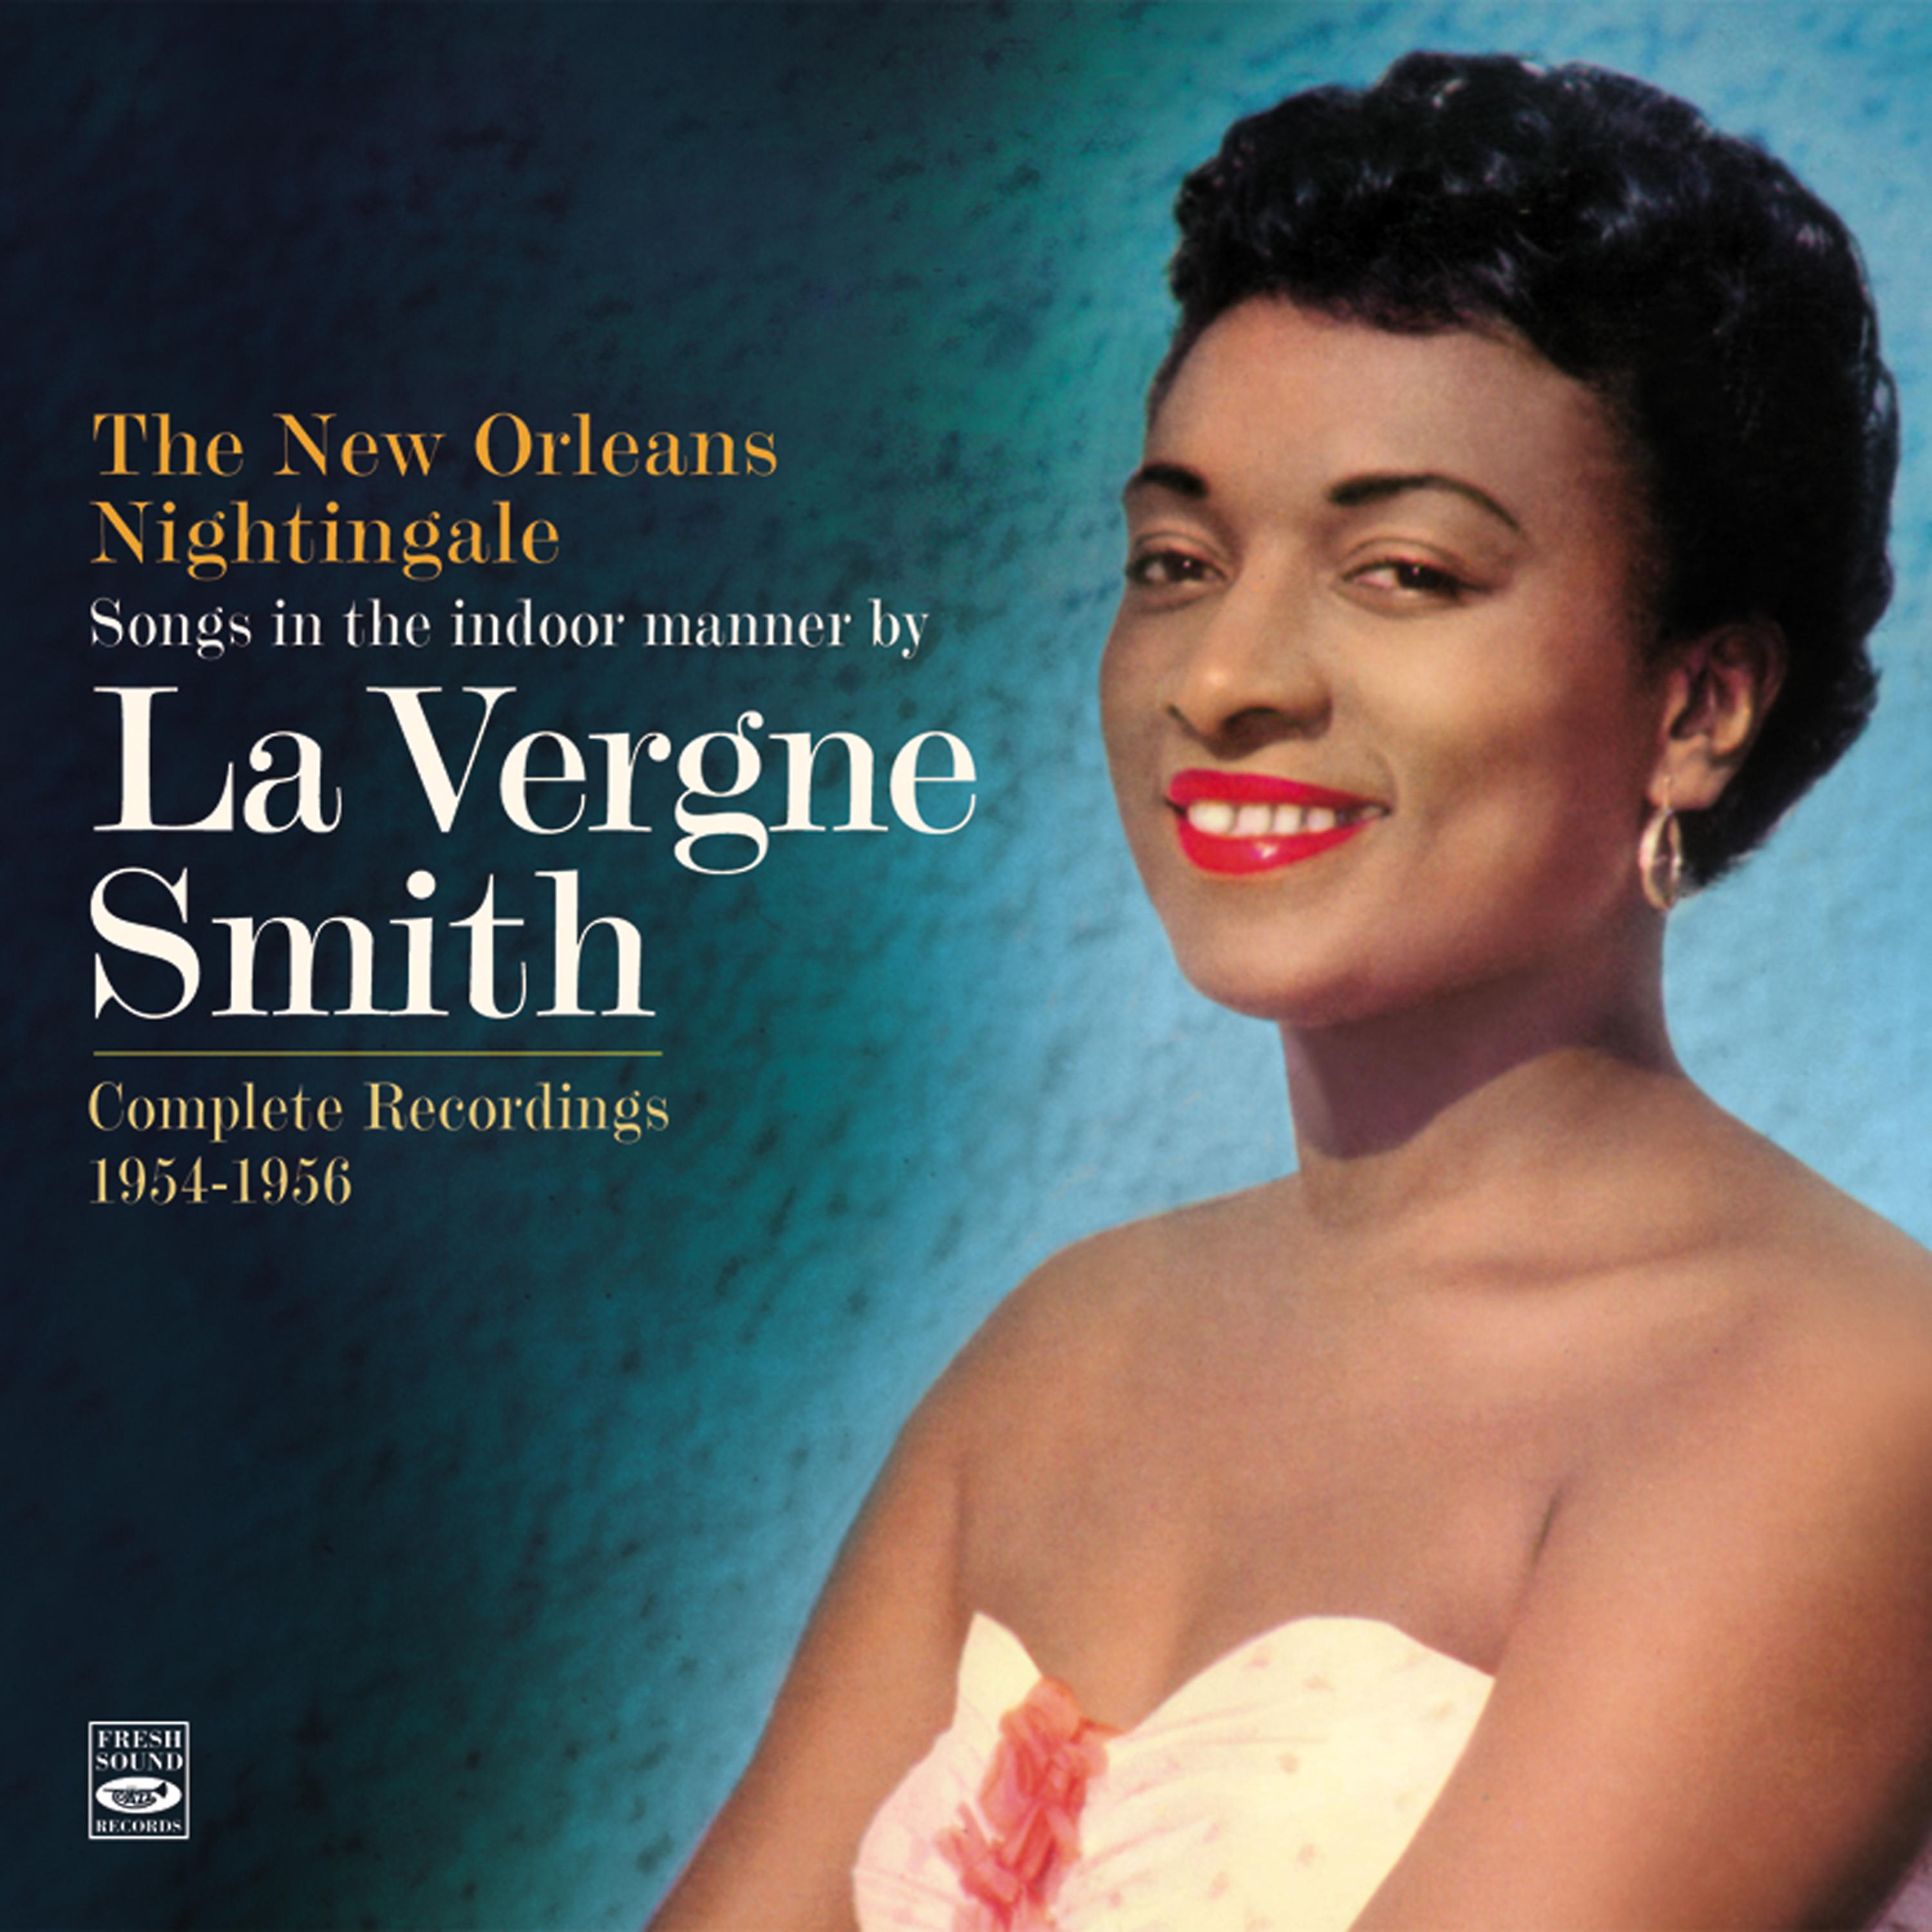 Постер альбома Songs in the Indoor Manner by La Vergne Smith. Complete Recordings 1954-1956. "Angel in the Absinthe House," "The New Orleans Nightingale" And "La Vergne Smith"